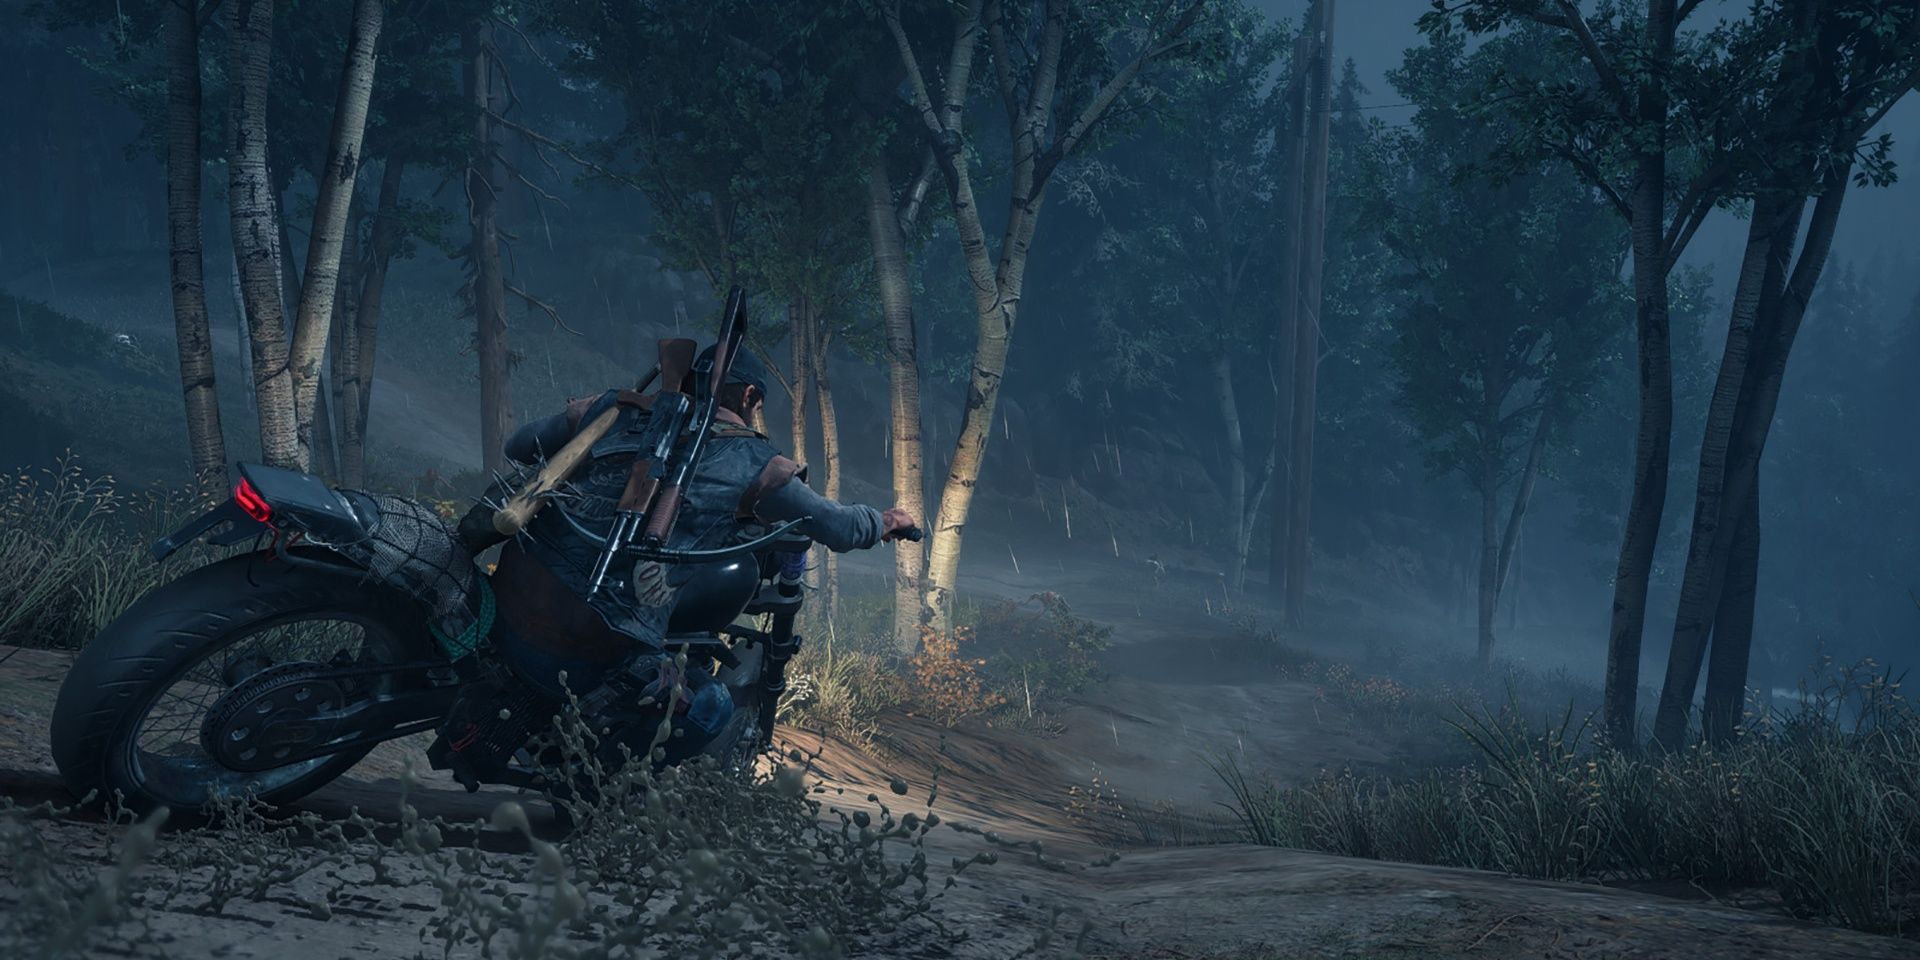 Deacon riding bike at night, Days Gone